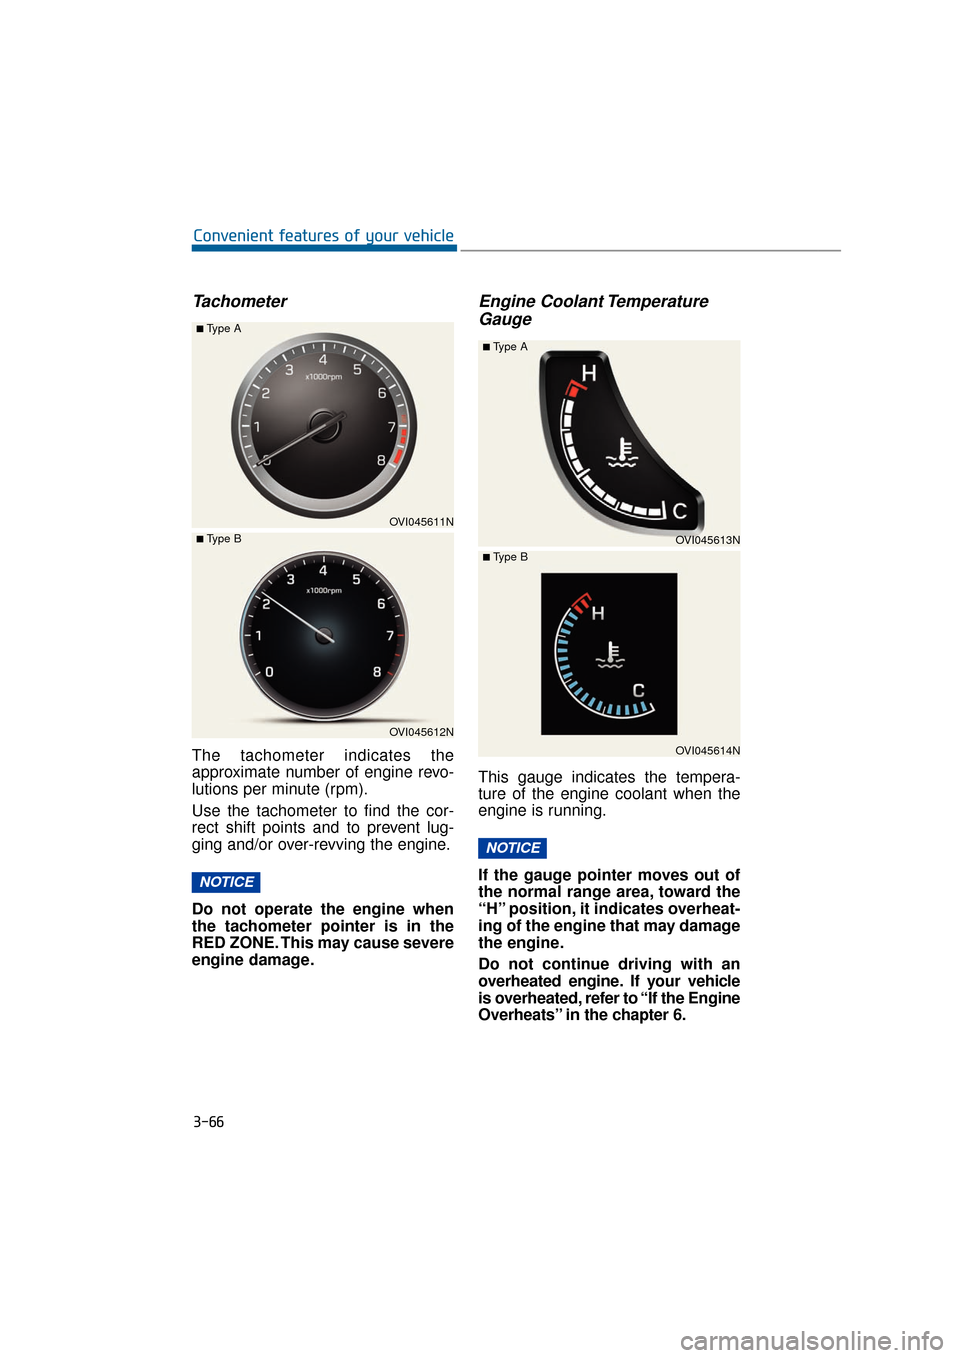 Hyundai Equus 2016 User Guide Tachometer
The tachometer indicates the
approximate number of engine revo-
lutions per minute (rpm).
Use the tachometer to find the cor-
rect shift points and to prevent lug-
ging and/or over-revving 